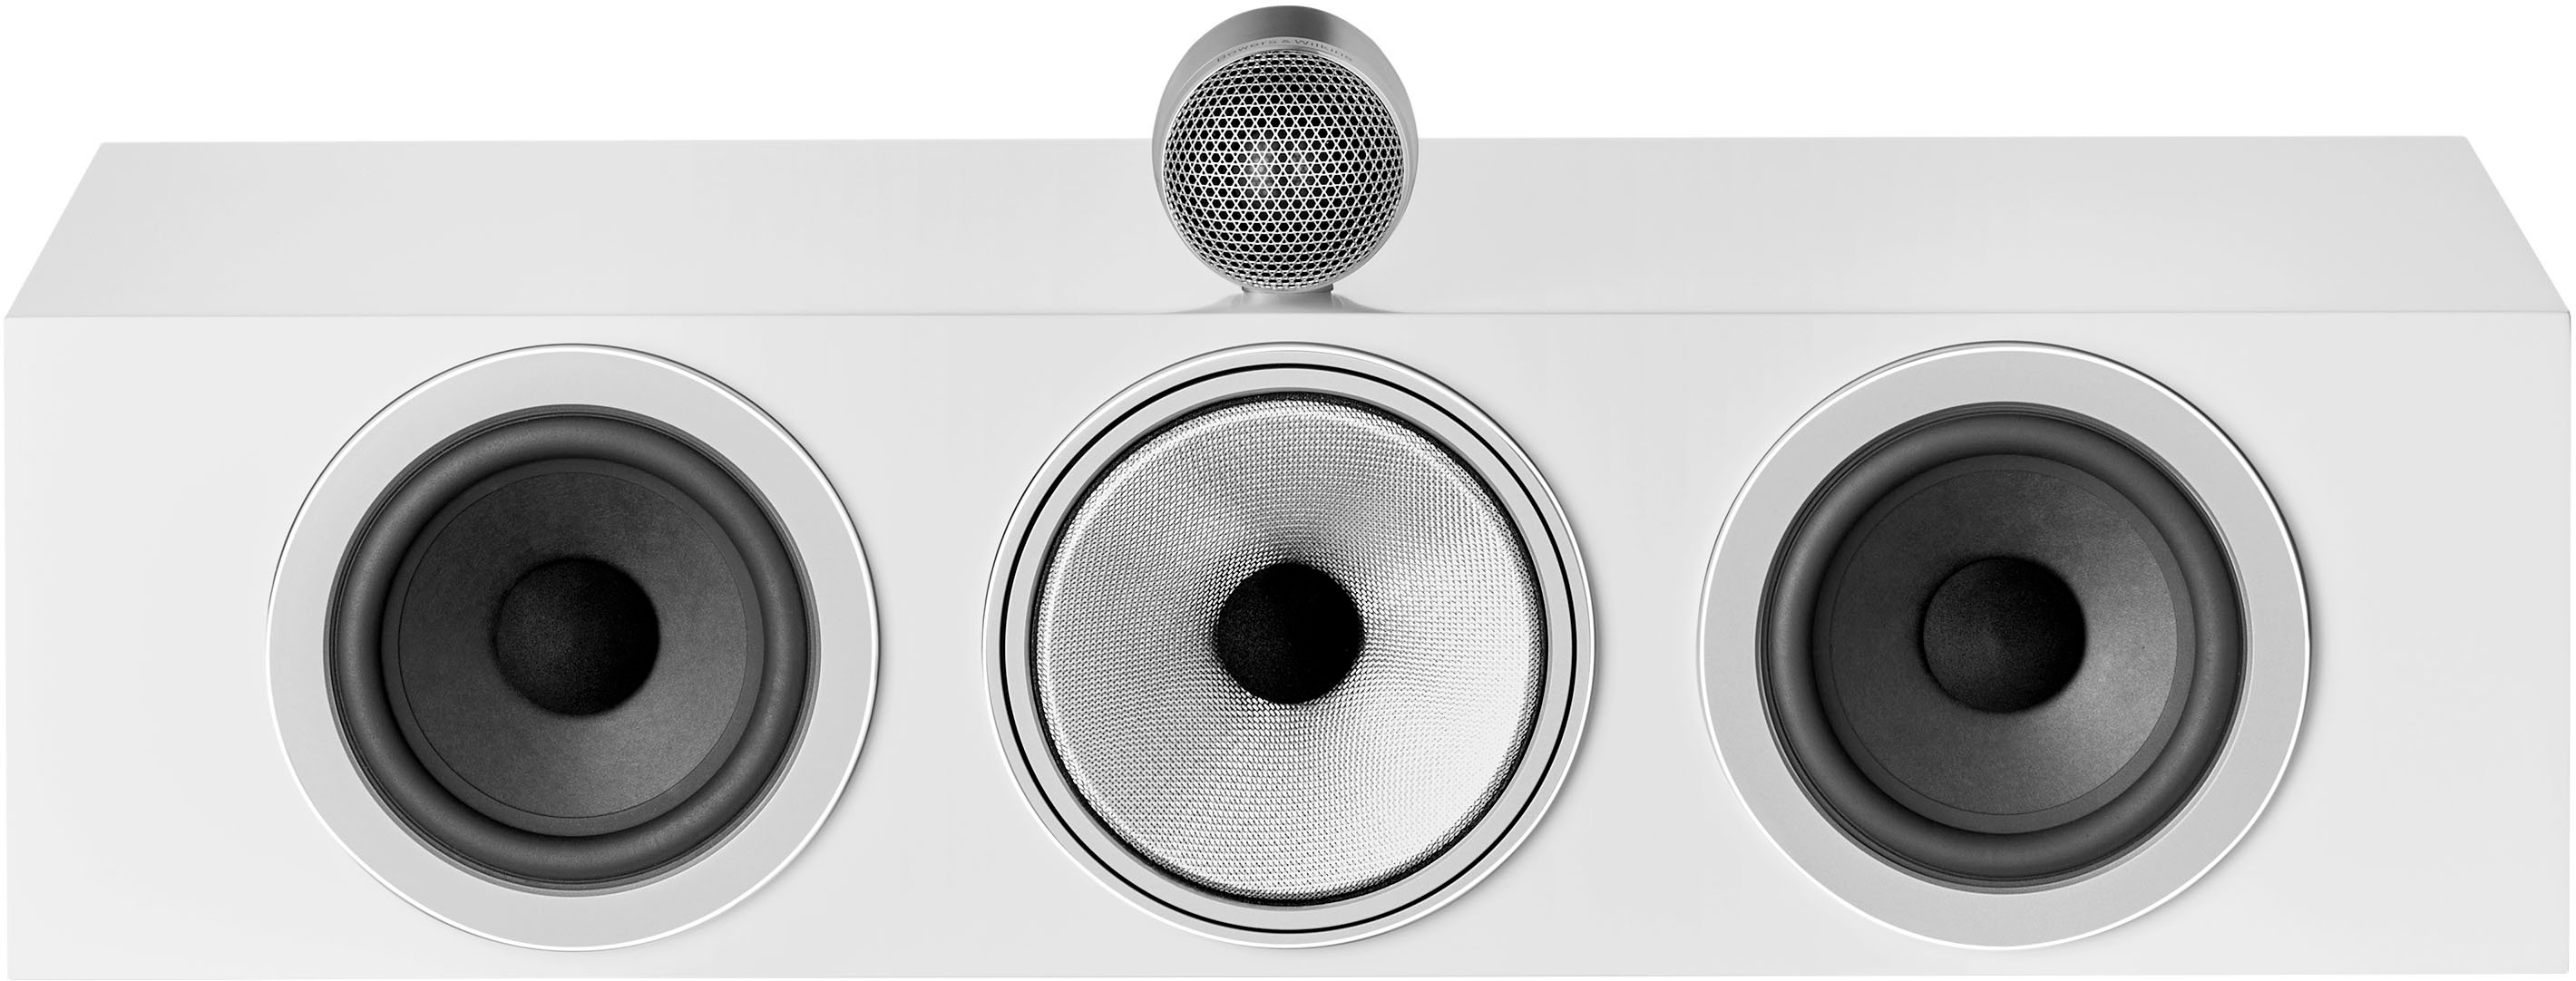 Angle View: Bowers & Wilkins - 700 Series 3 Center Channel with 1" Tweeter On Top and Two 6.5" Bass Drivers (Each) - White